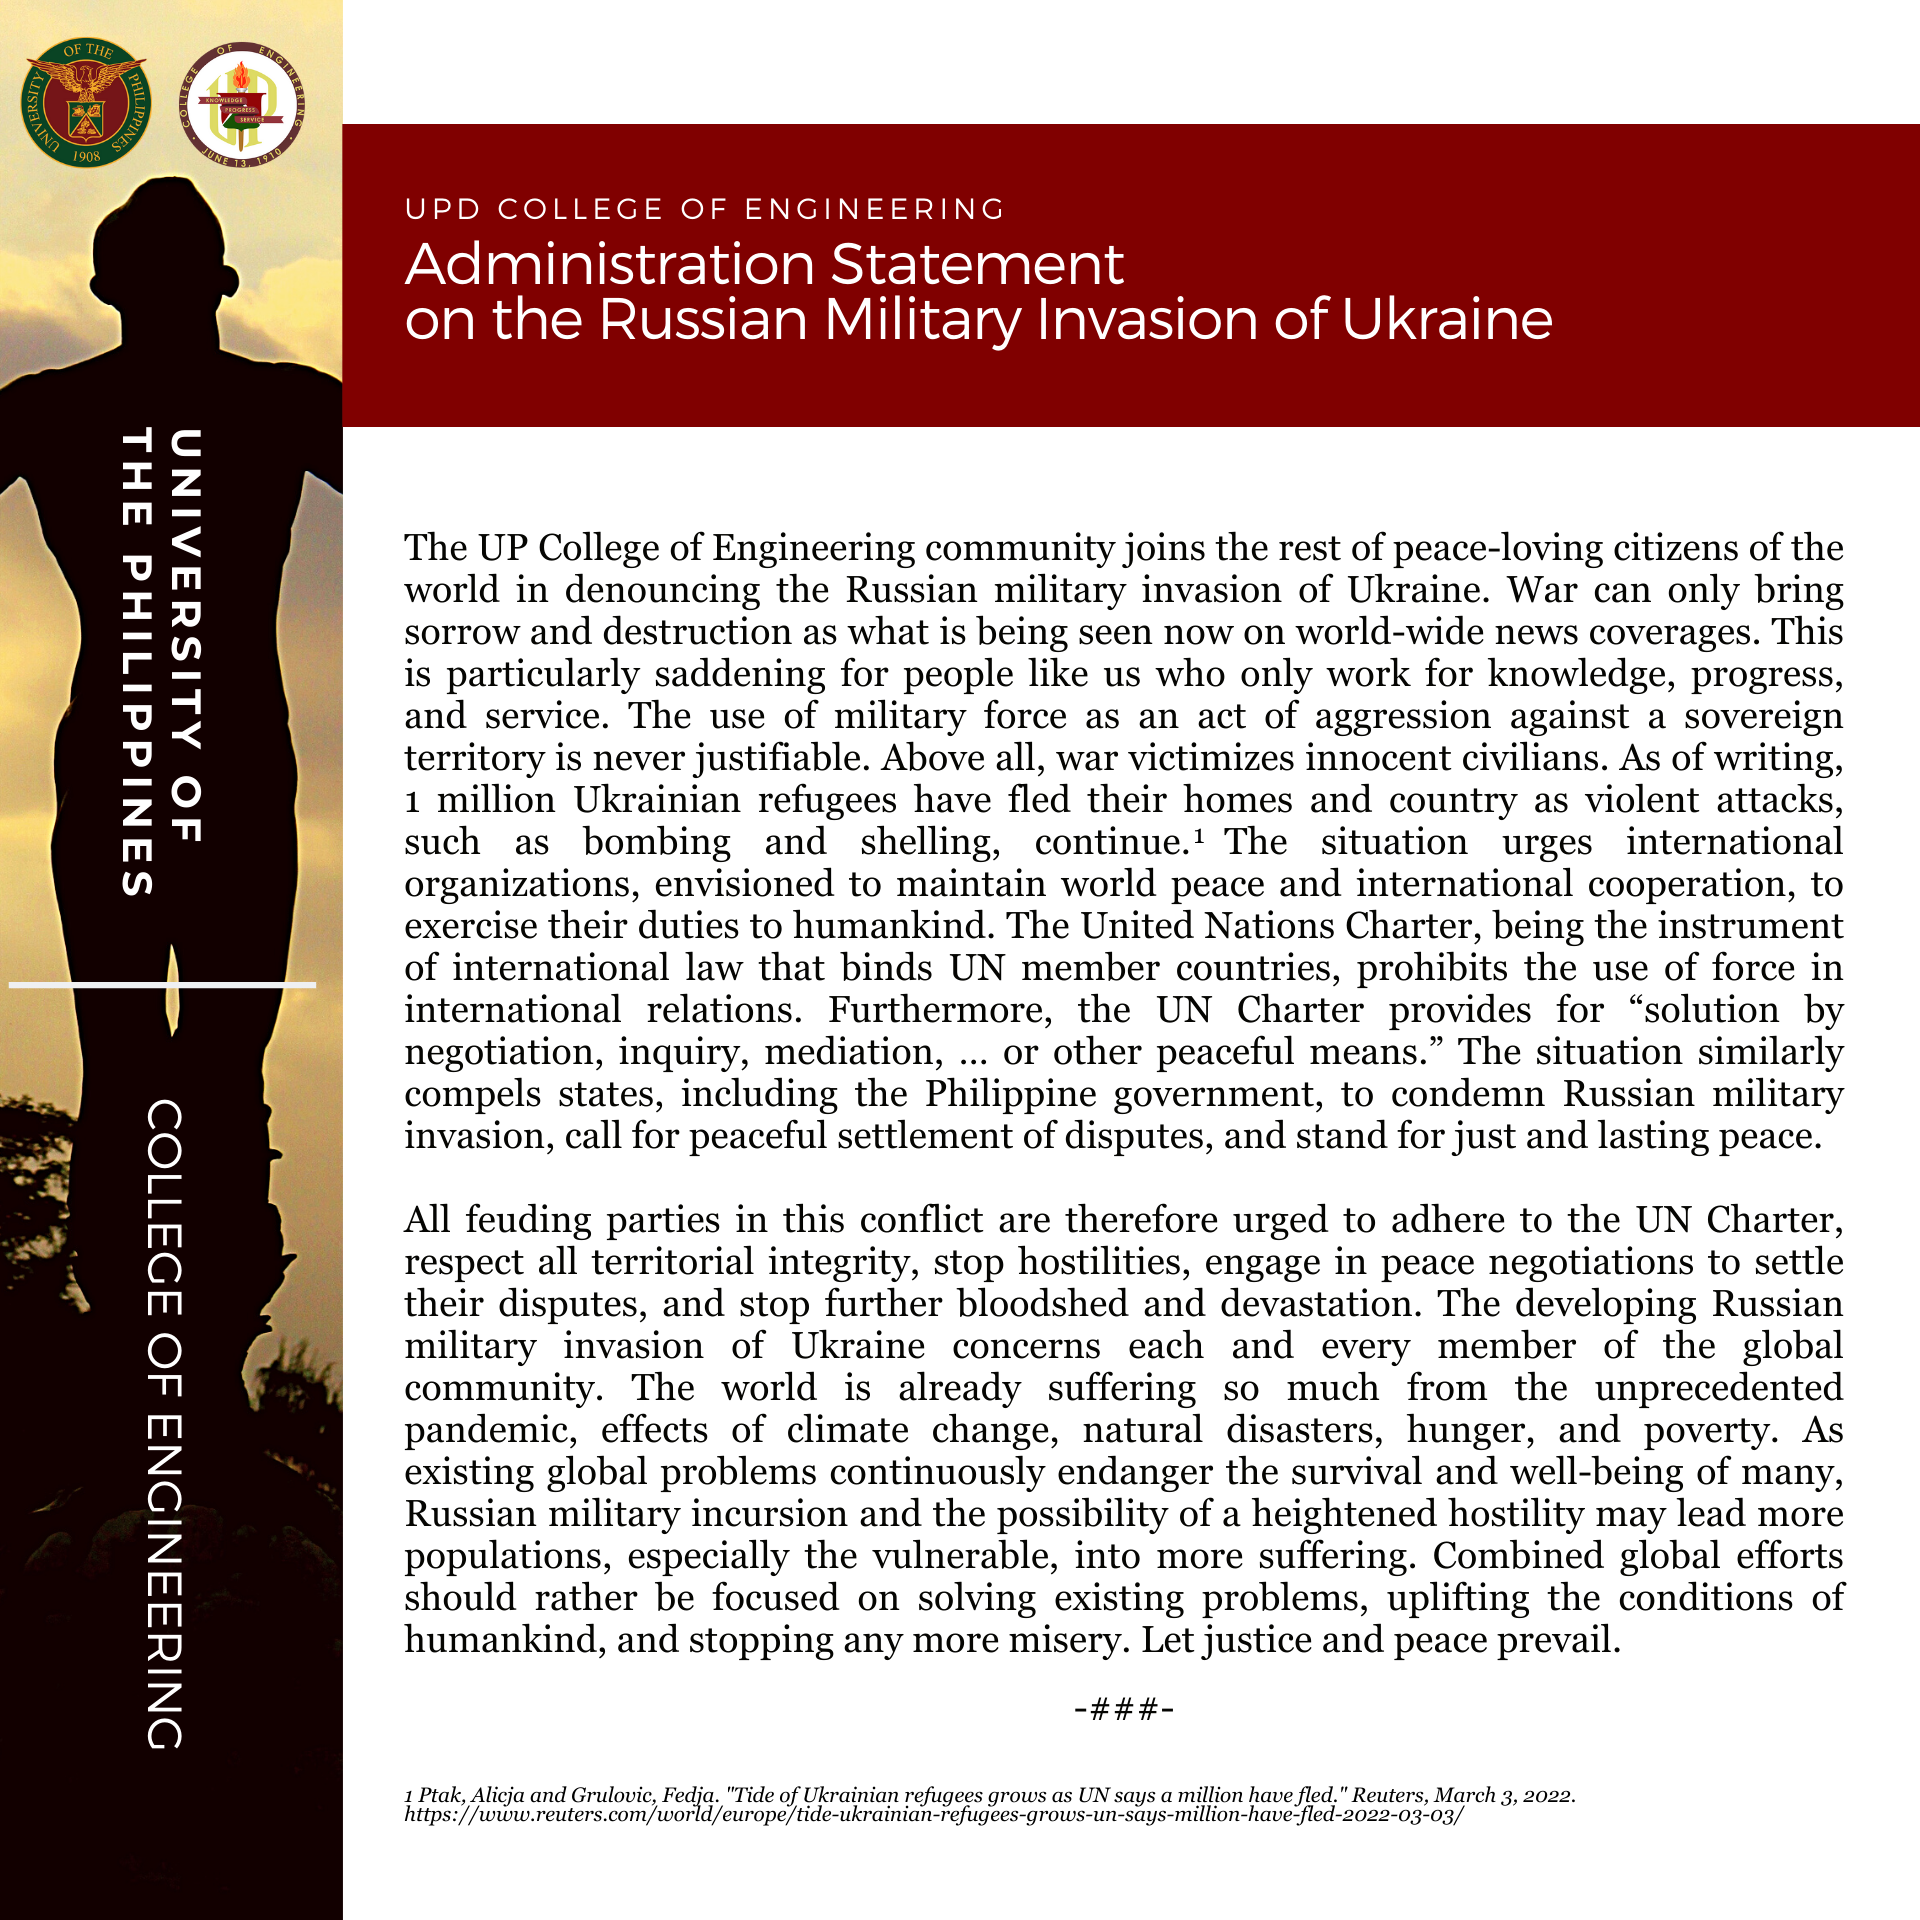 UPD College of Engineering Administration Statement on the Russian Military Invasion of Ukraine